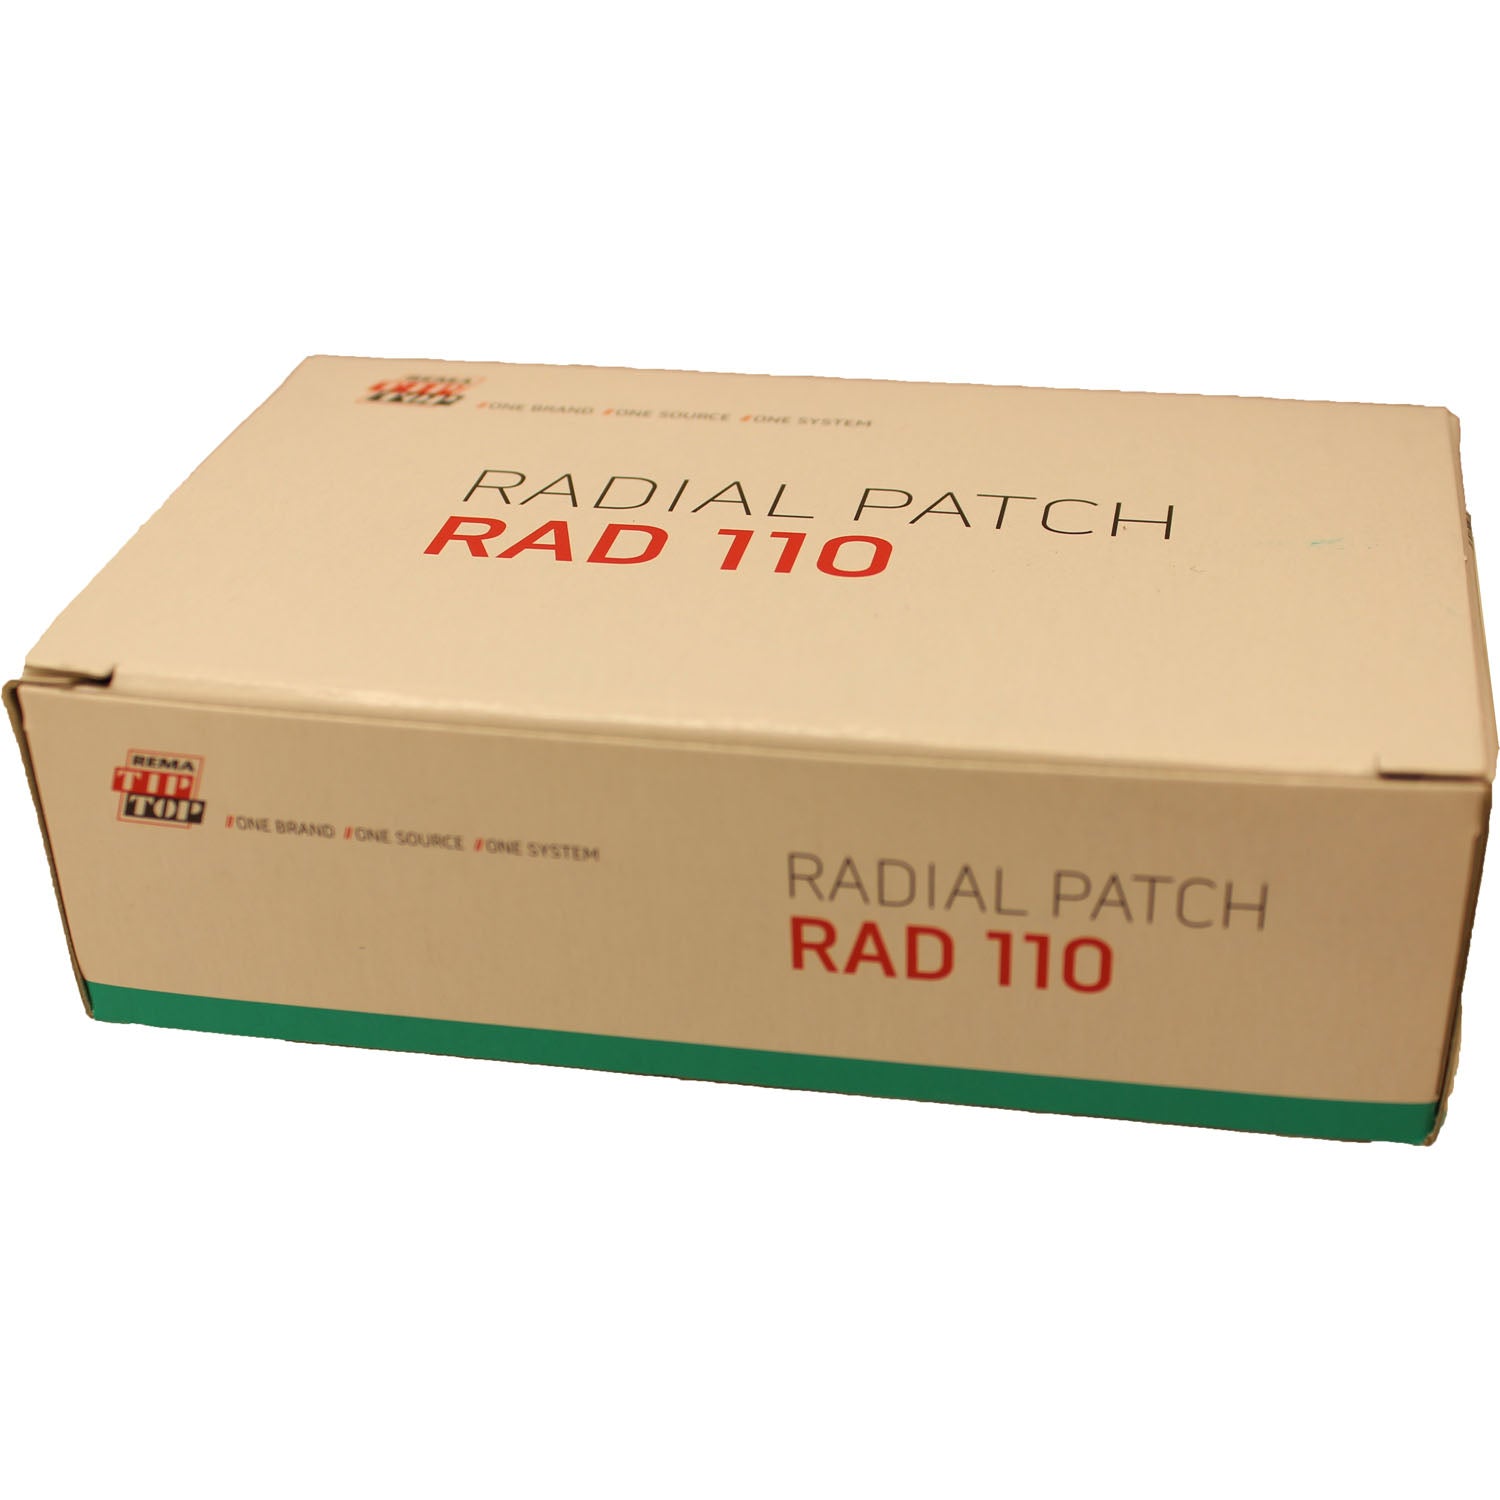 REMA TIP TOP RAD-110 Radial Tire Repair Patch 2" X 2-3/4" 1 Ply - Box of 20